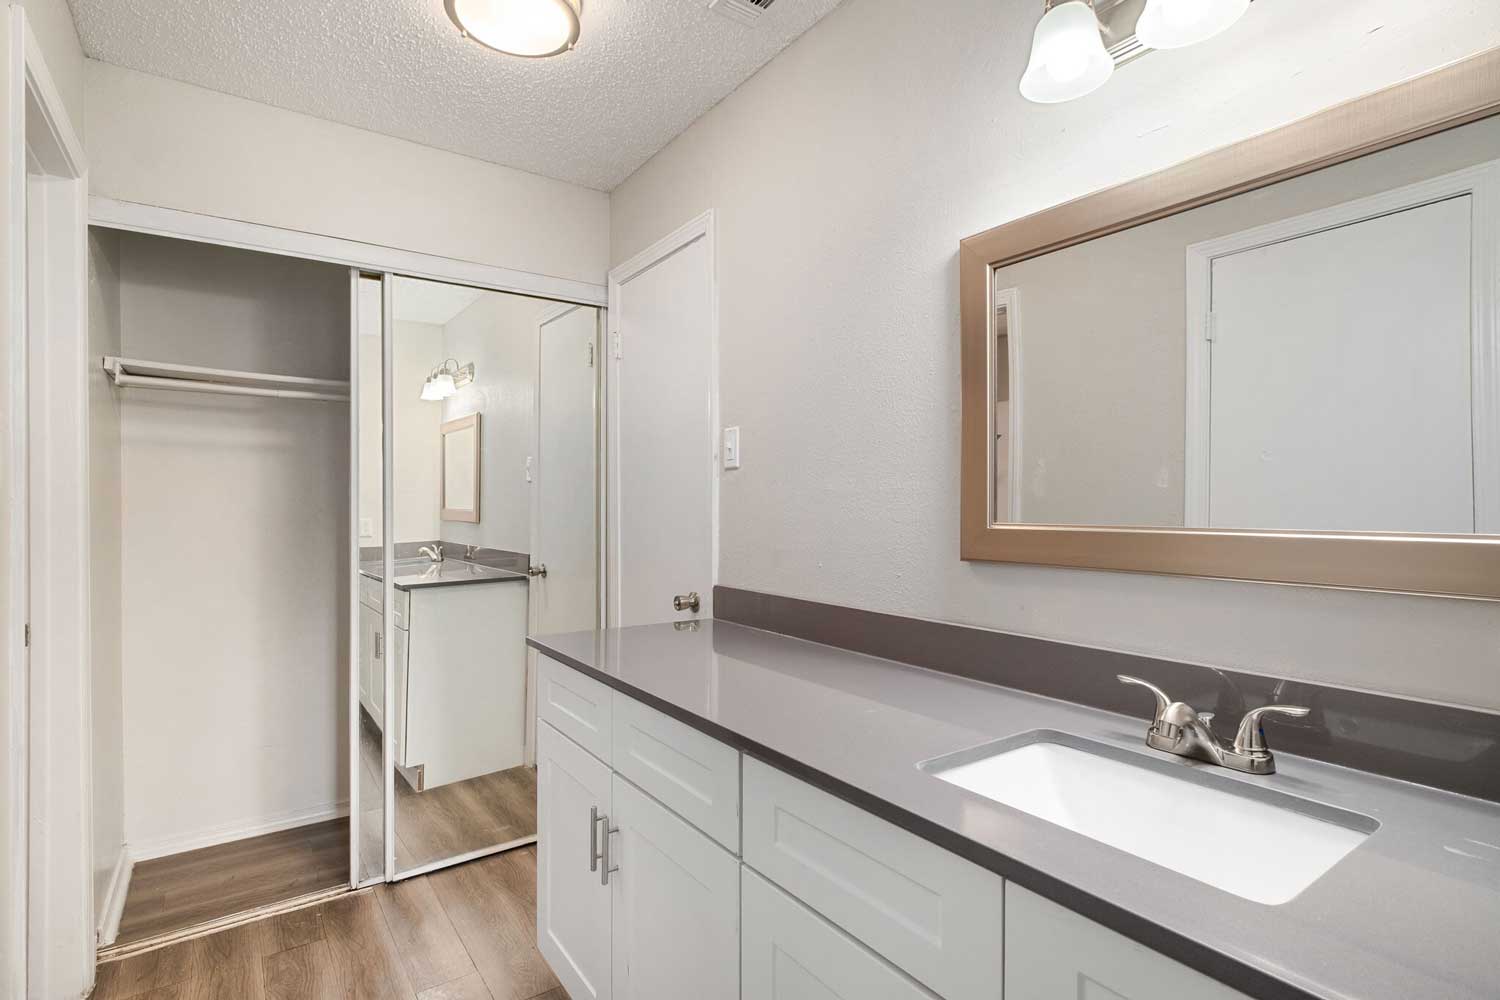 Expansive Vanity Space & Large Closet Area